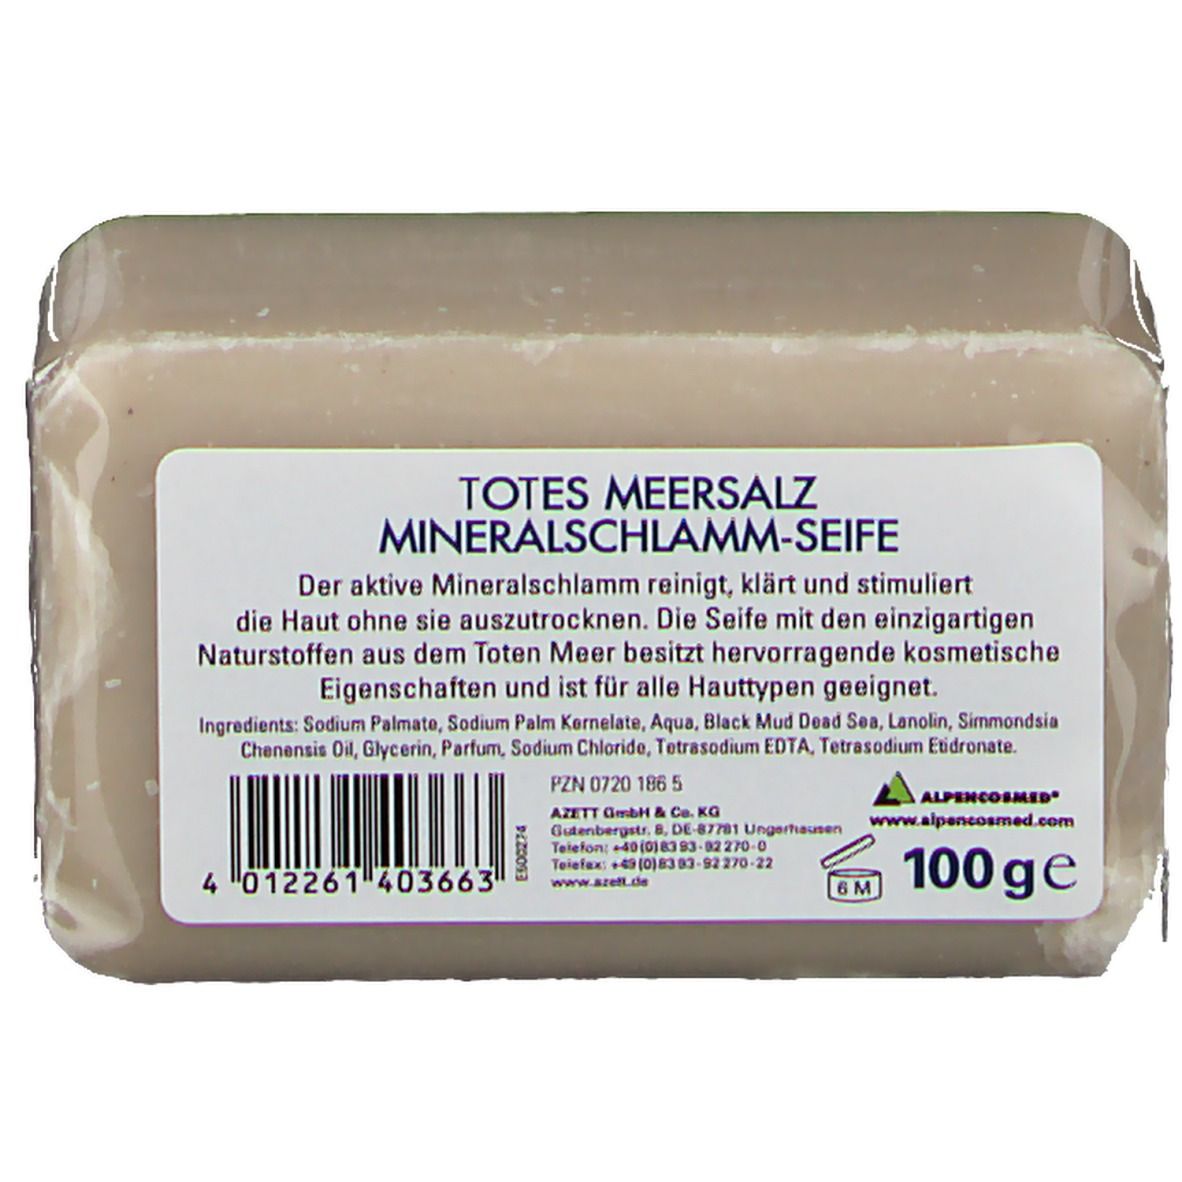 TOTES MEER Mineralschlamm-Seife